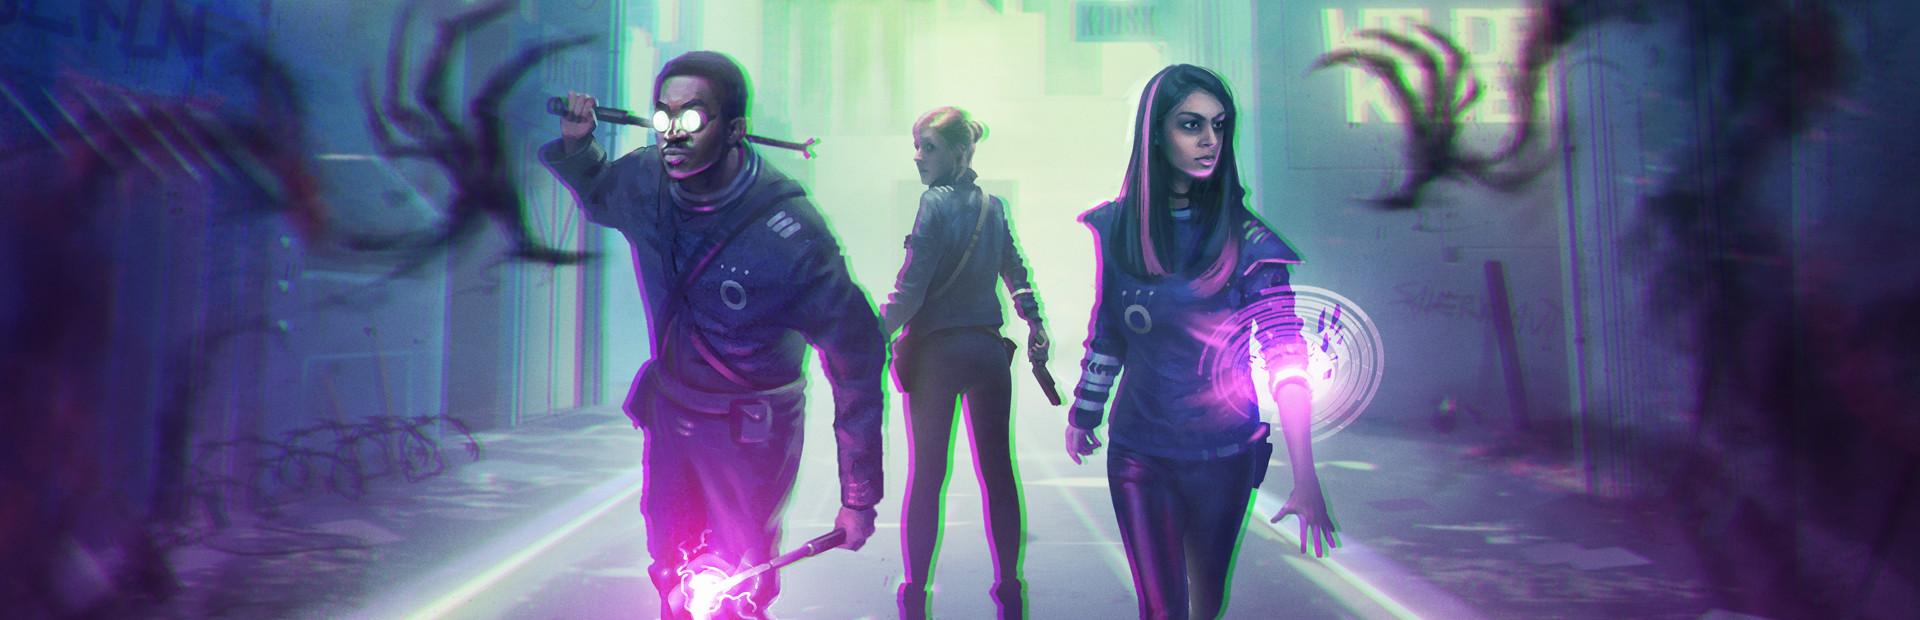 Code 7: A Story-Driven Hacking Adventure cover image